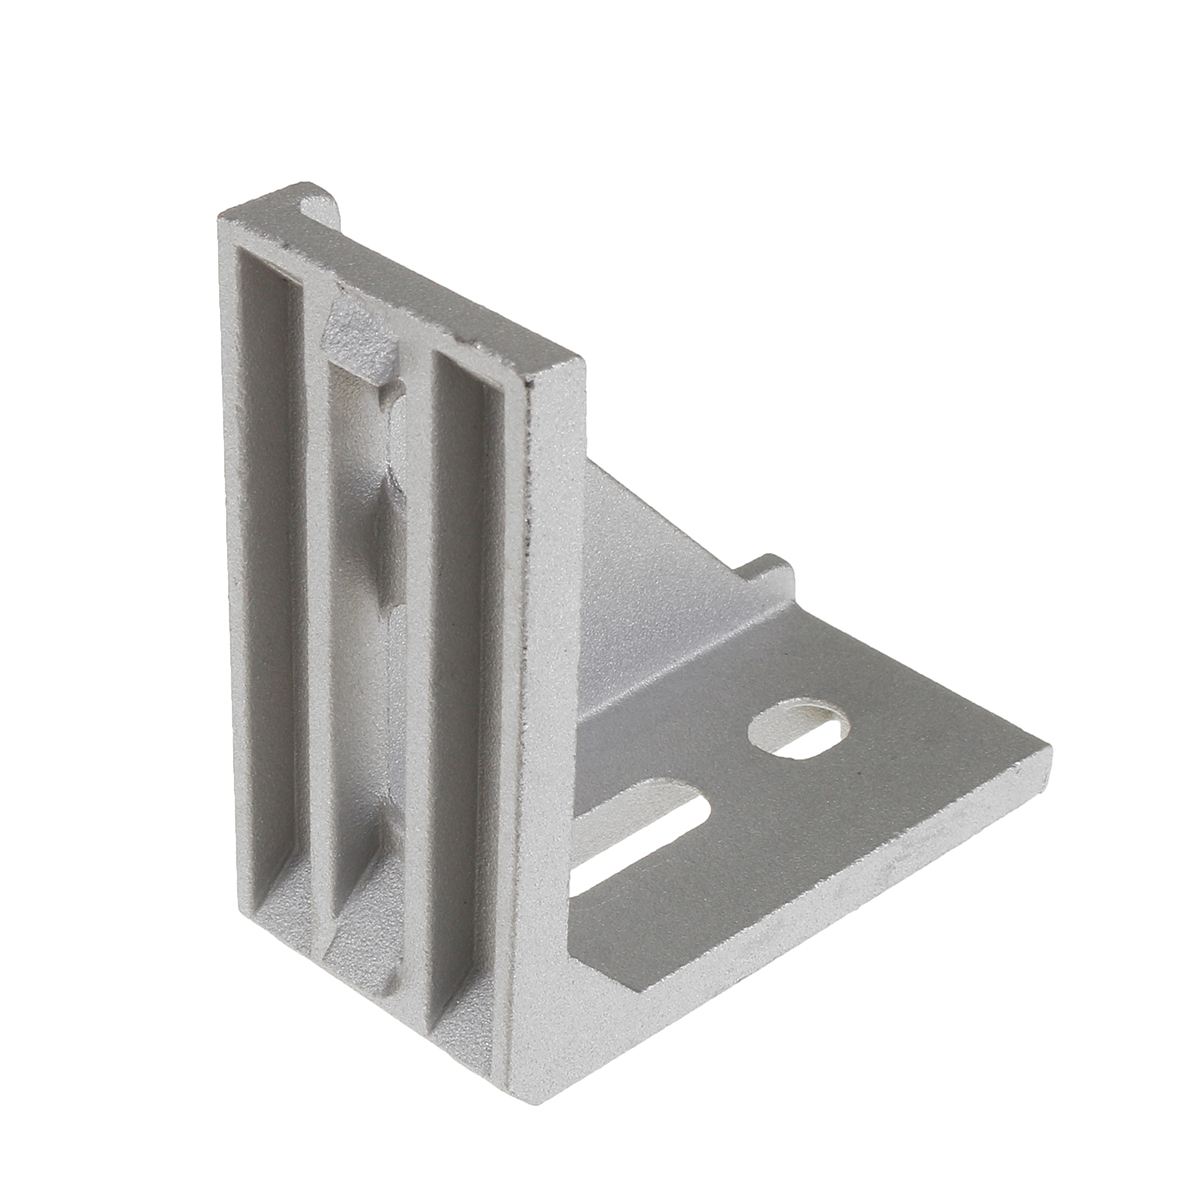 Sulevetrade-AJ40-40times80mm-Aluminum-Angle-Corner-Joint-Connector-90-degrees-4080-Series-Aluminum-P-1293672-9